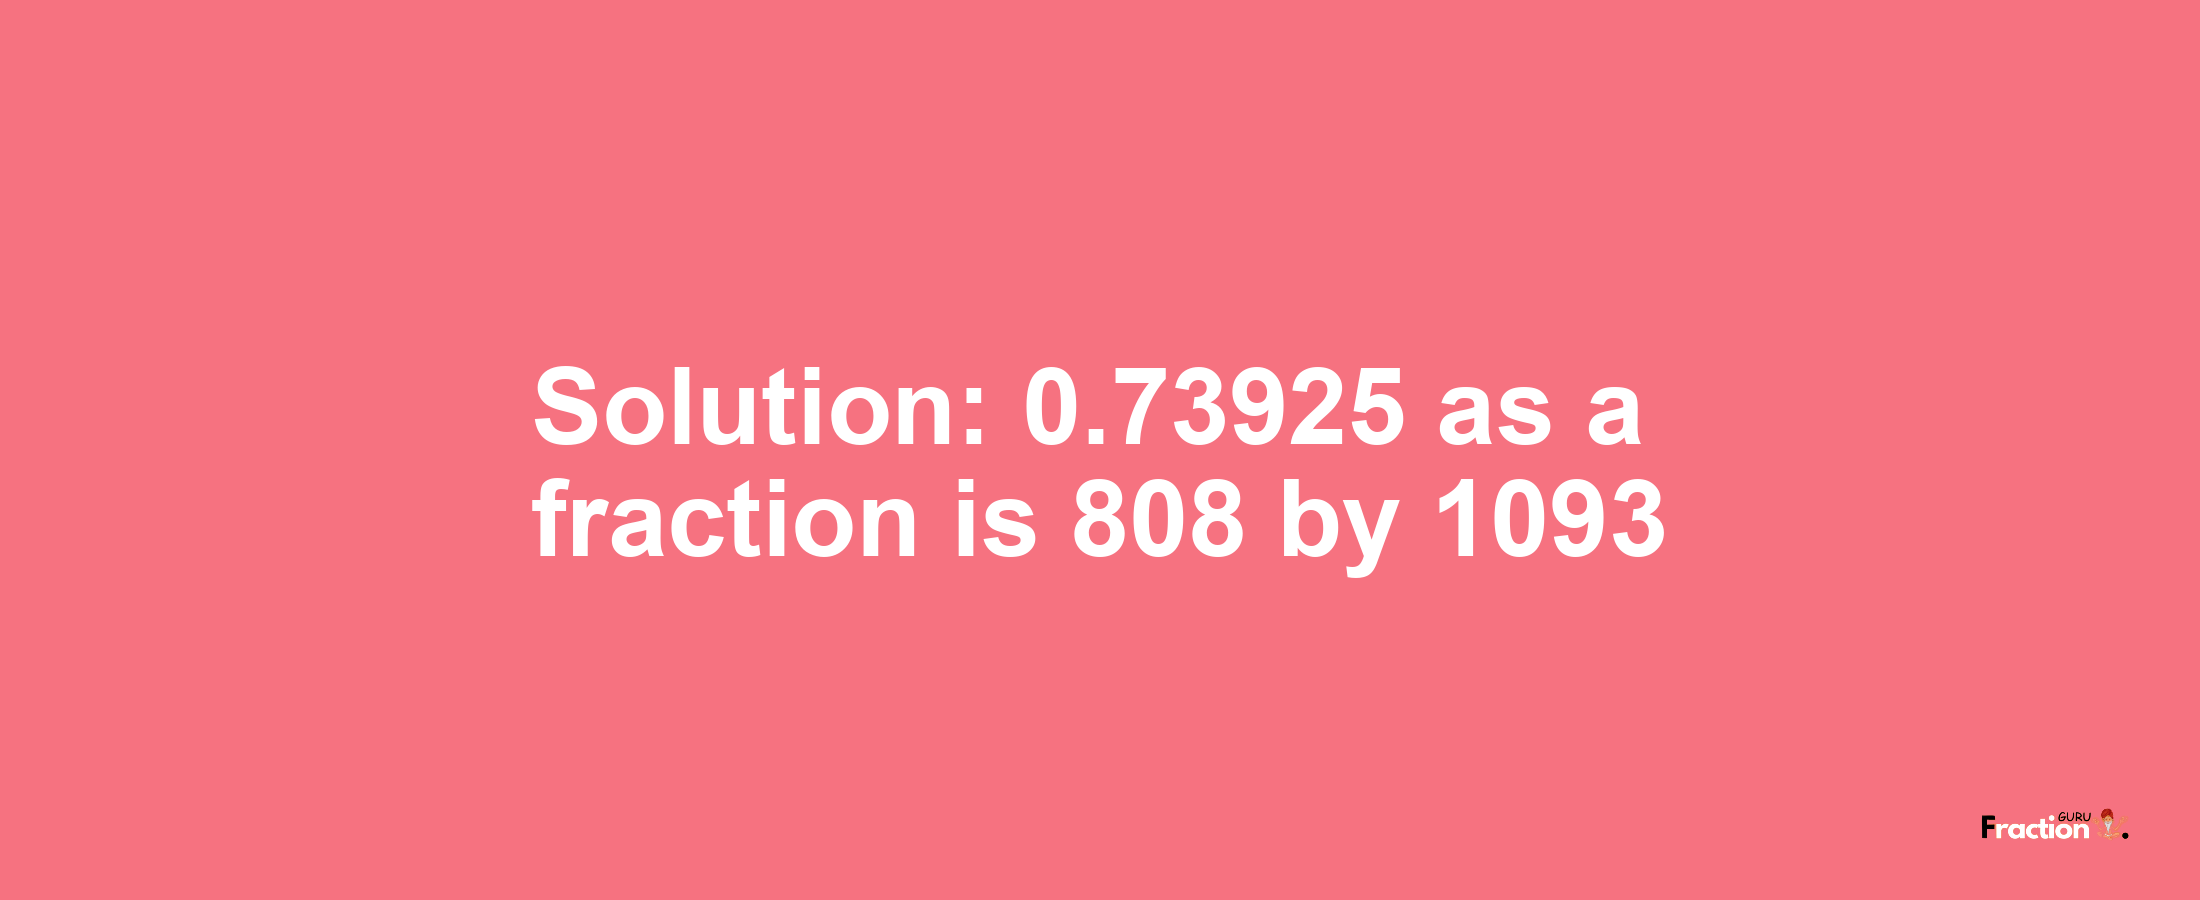 Solution:0.73925 as a fraction is 808/1093